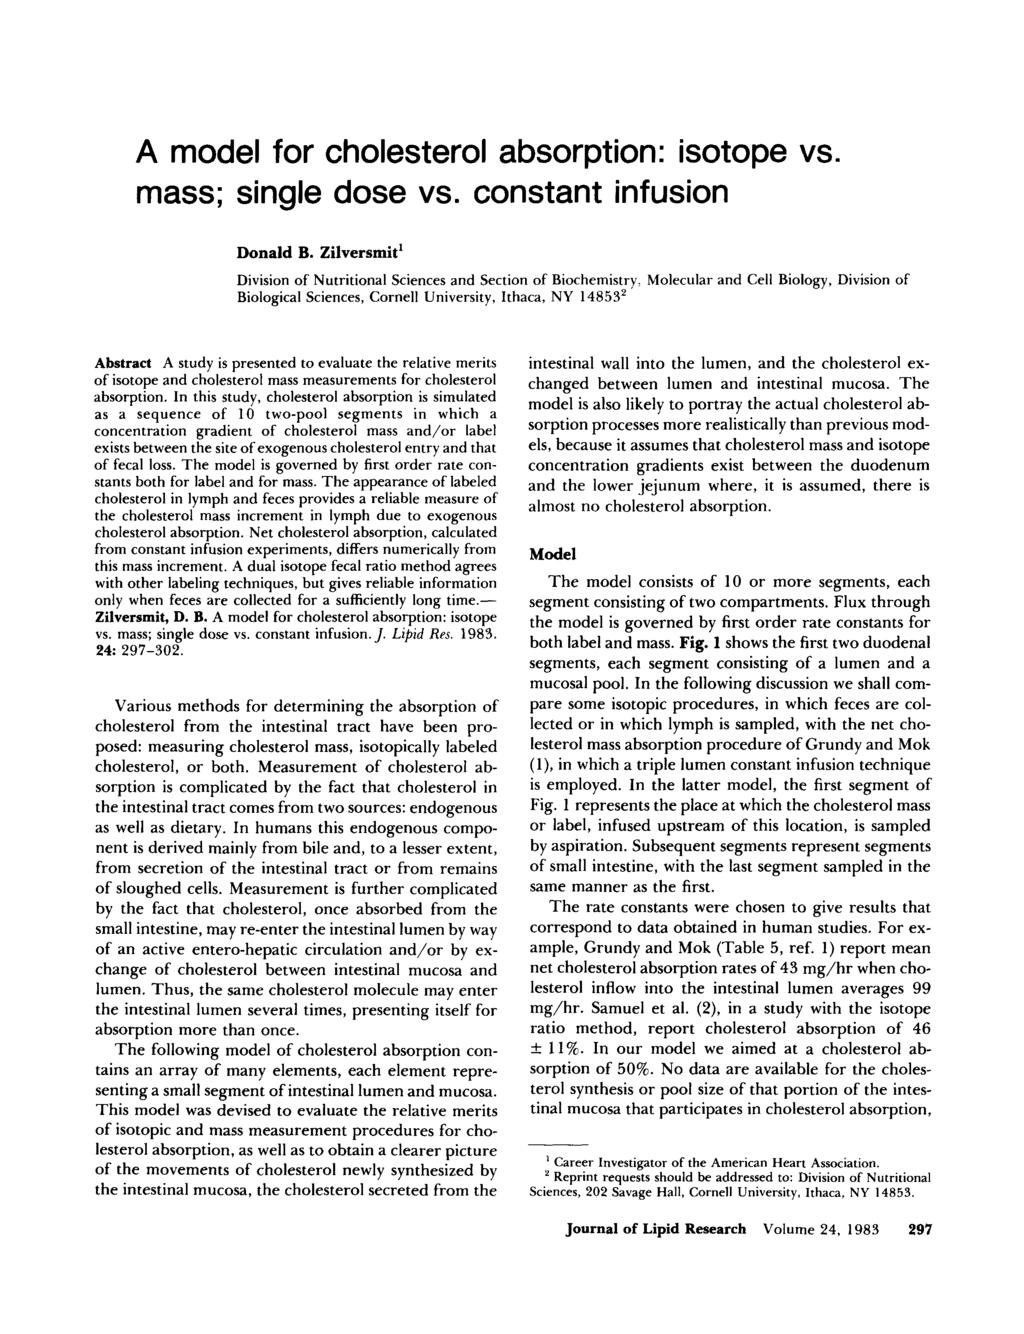 A model for cholesterol absorption: isotope vs. mass; single dose vs. constant infusion Donald B.